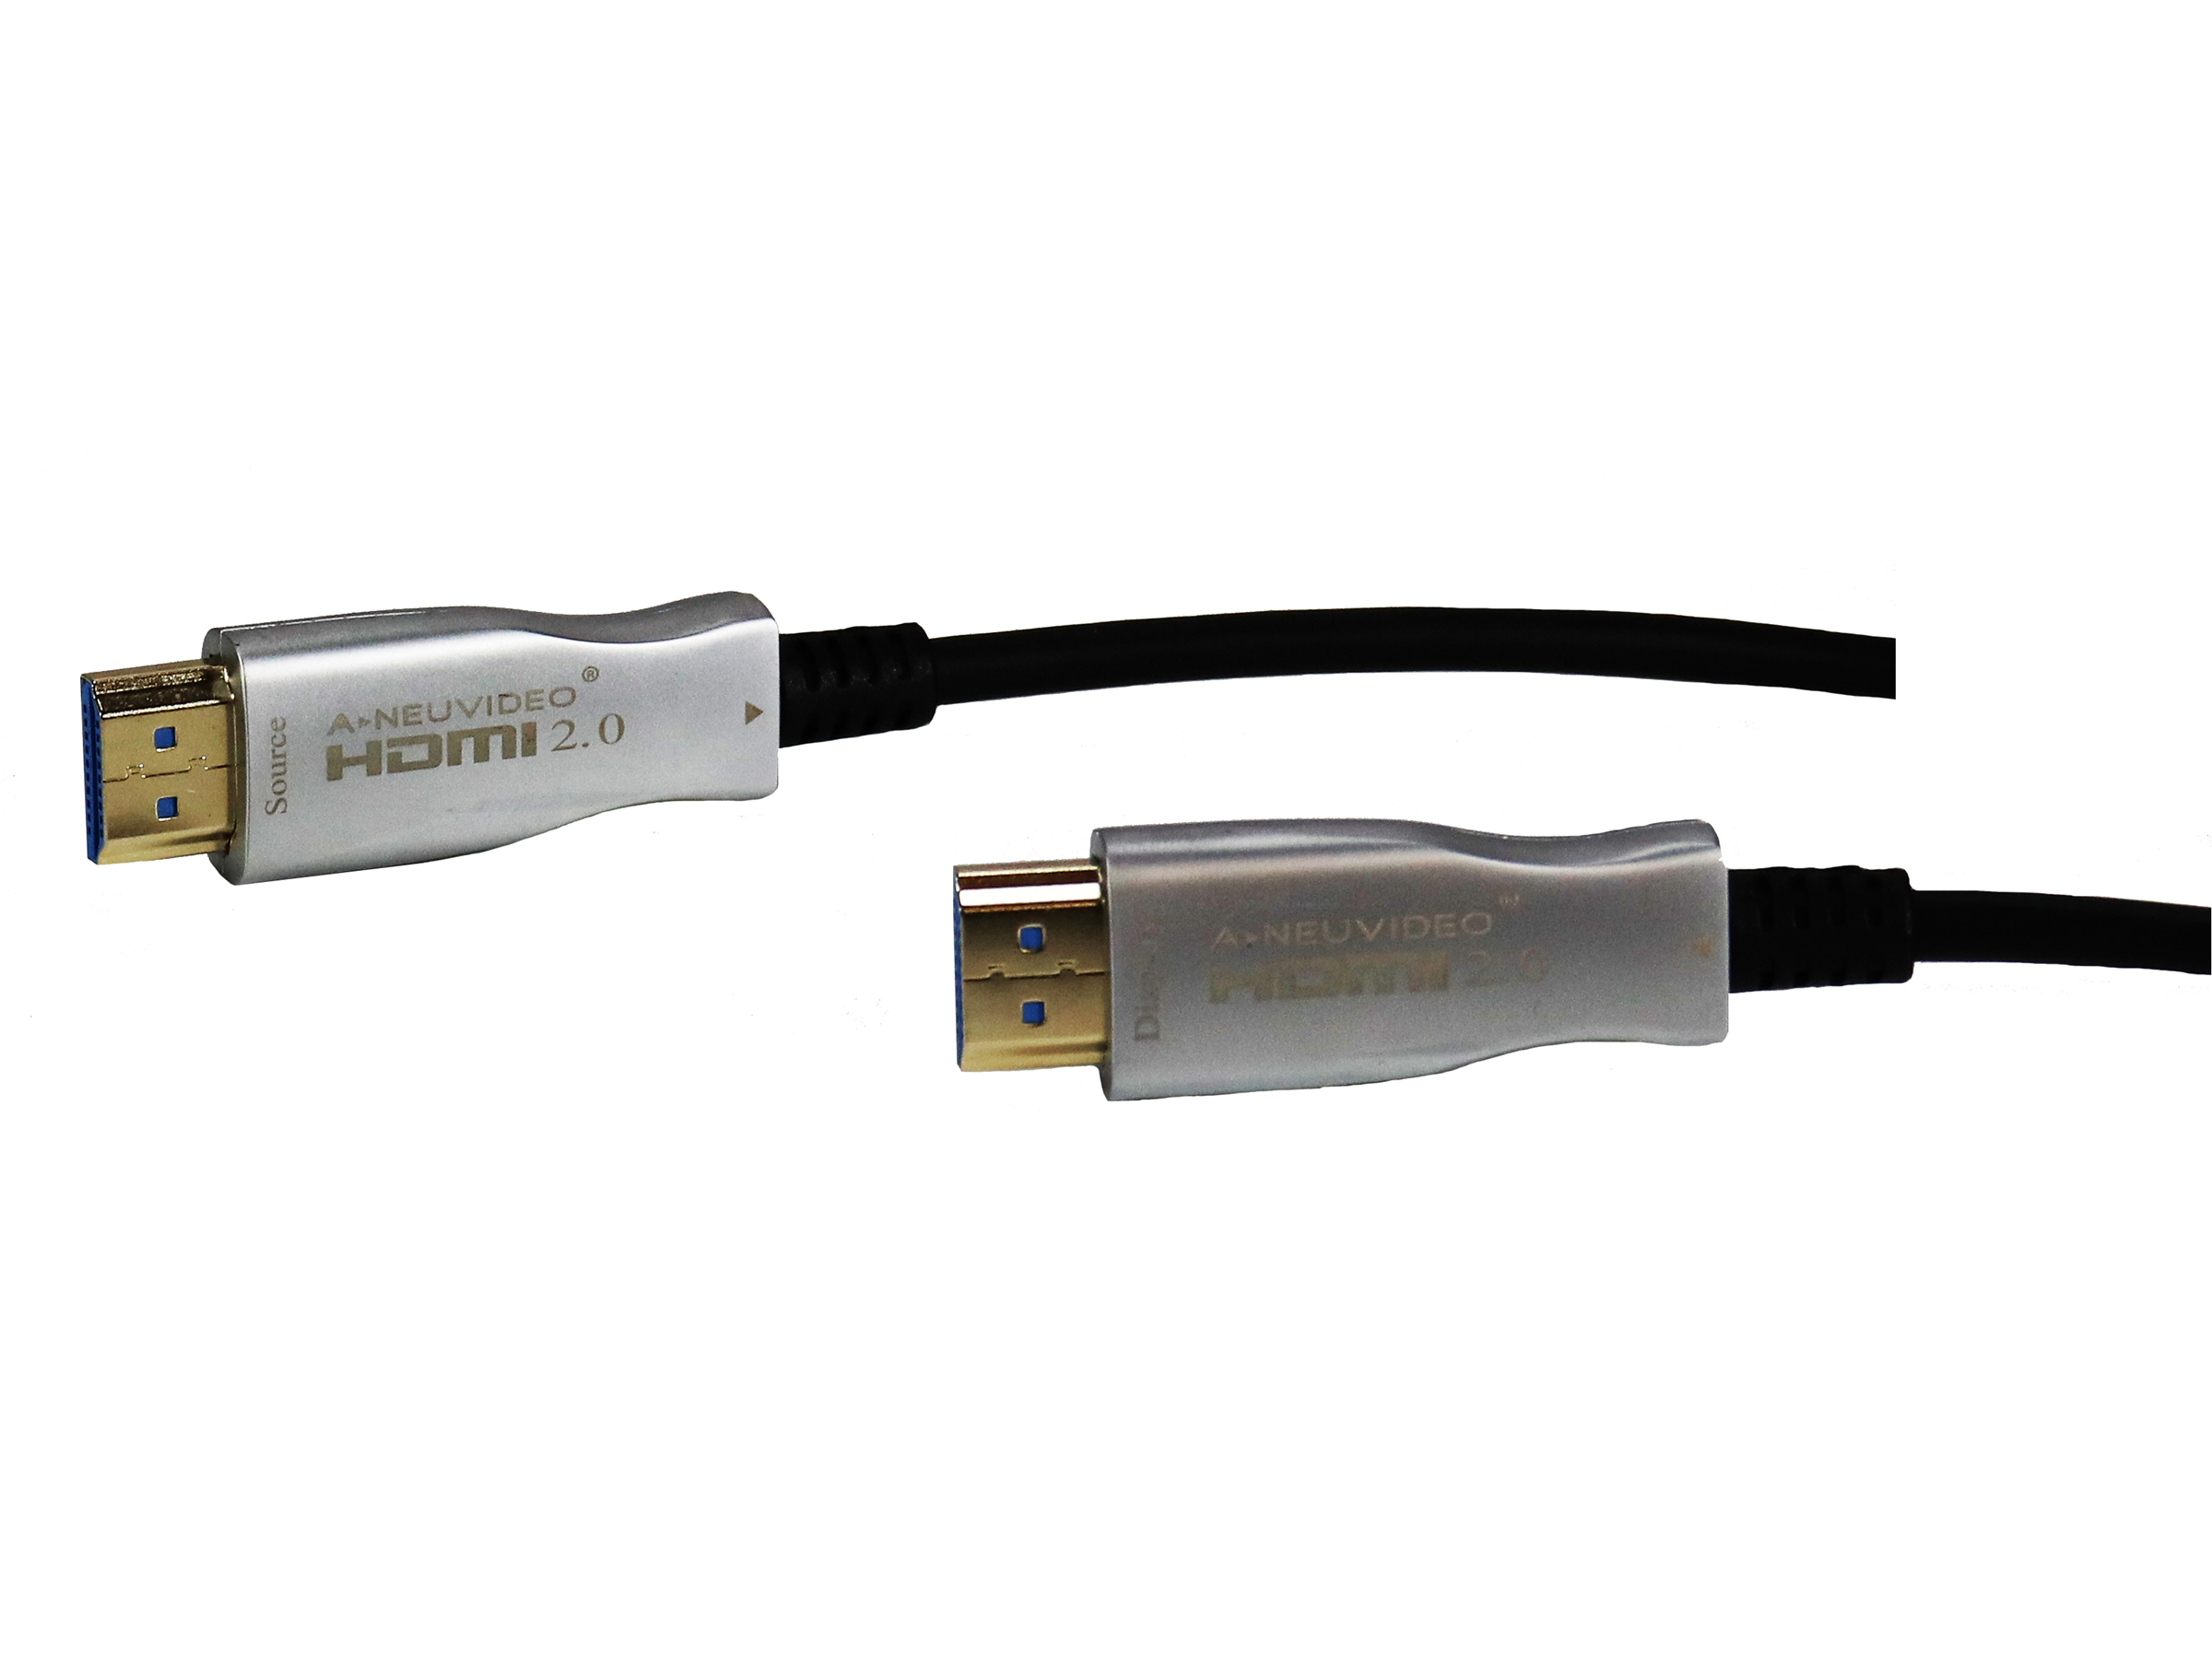 ANI-AOC-60 Fiber Optic Hdmi Active Optical Cable - 60m/197ft by A-NeuVideo